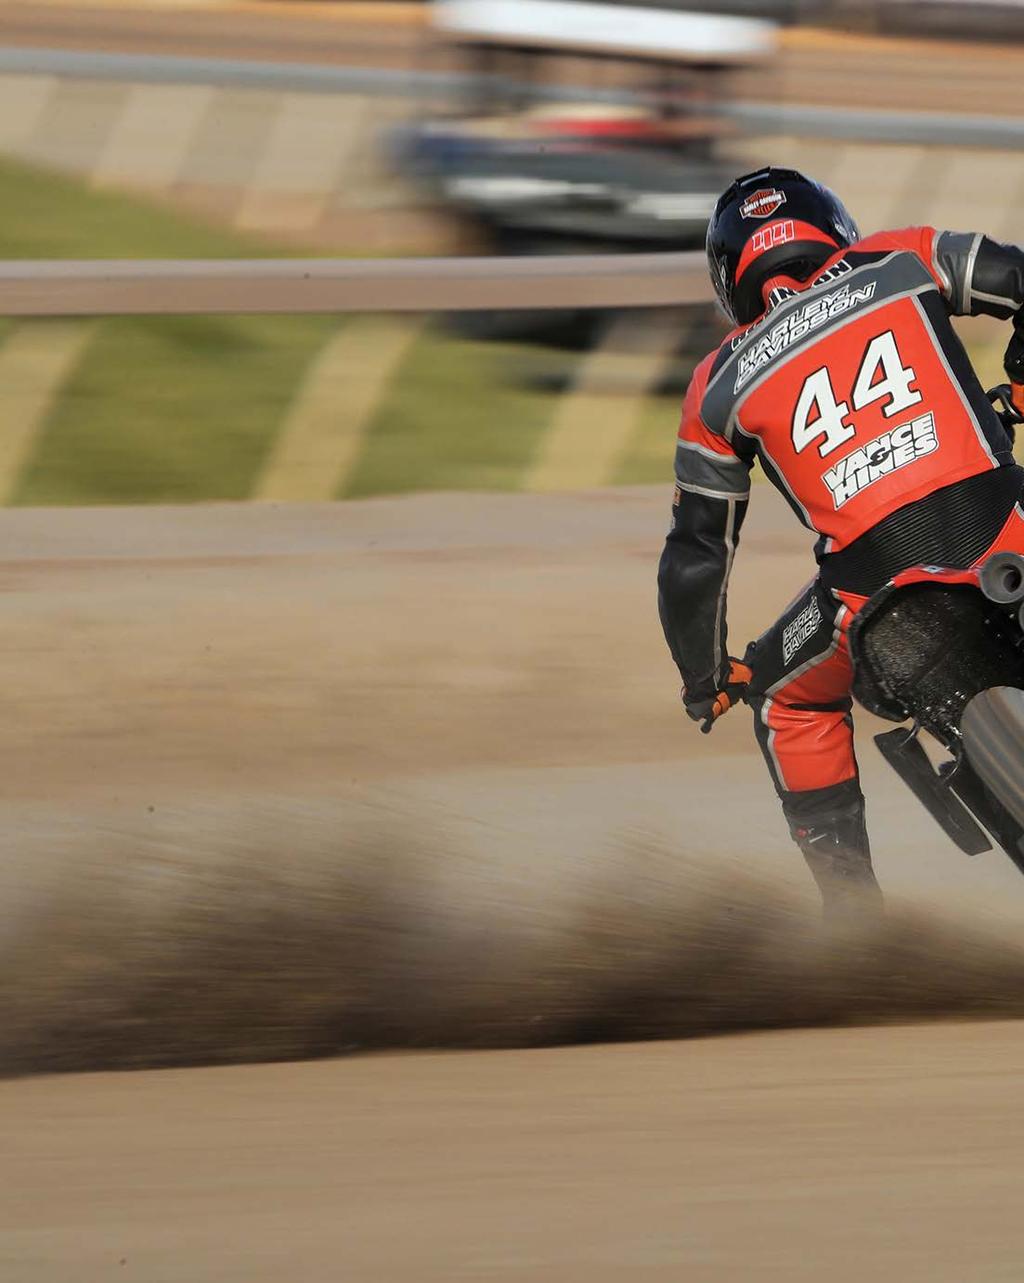 P20 CAPTURED Sliding Season If this photo of Brandon Robinson doesn t get you into the mood for some flat track racing, nothing will.